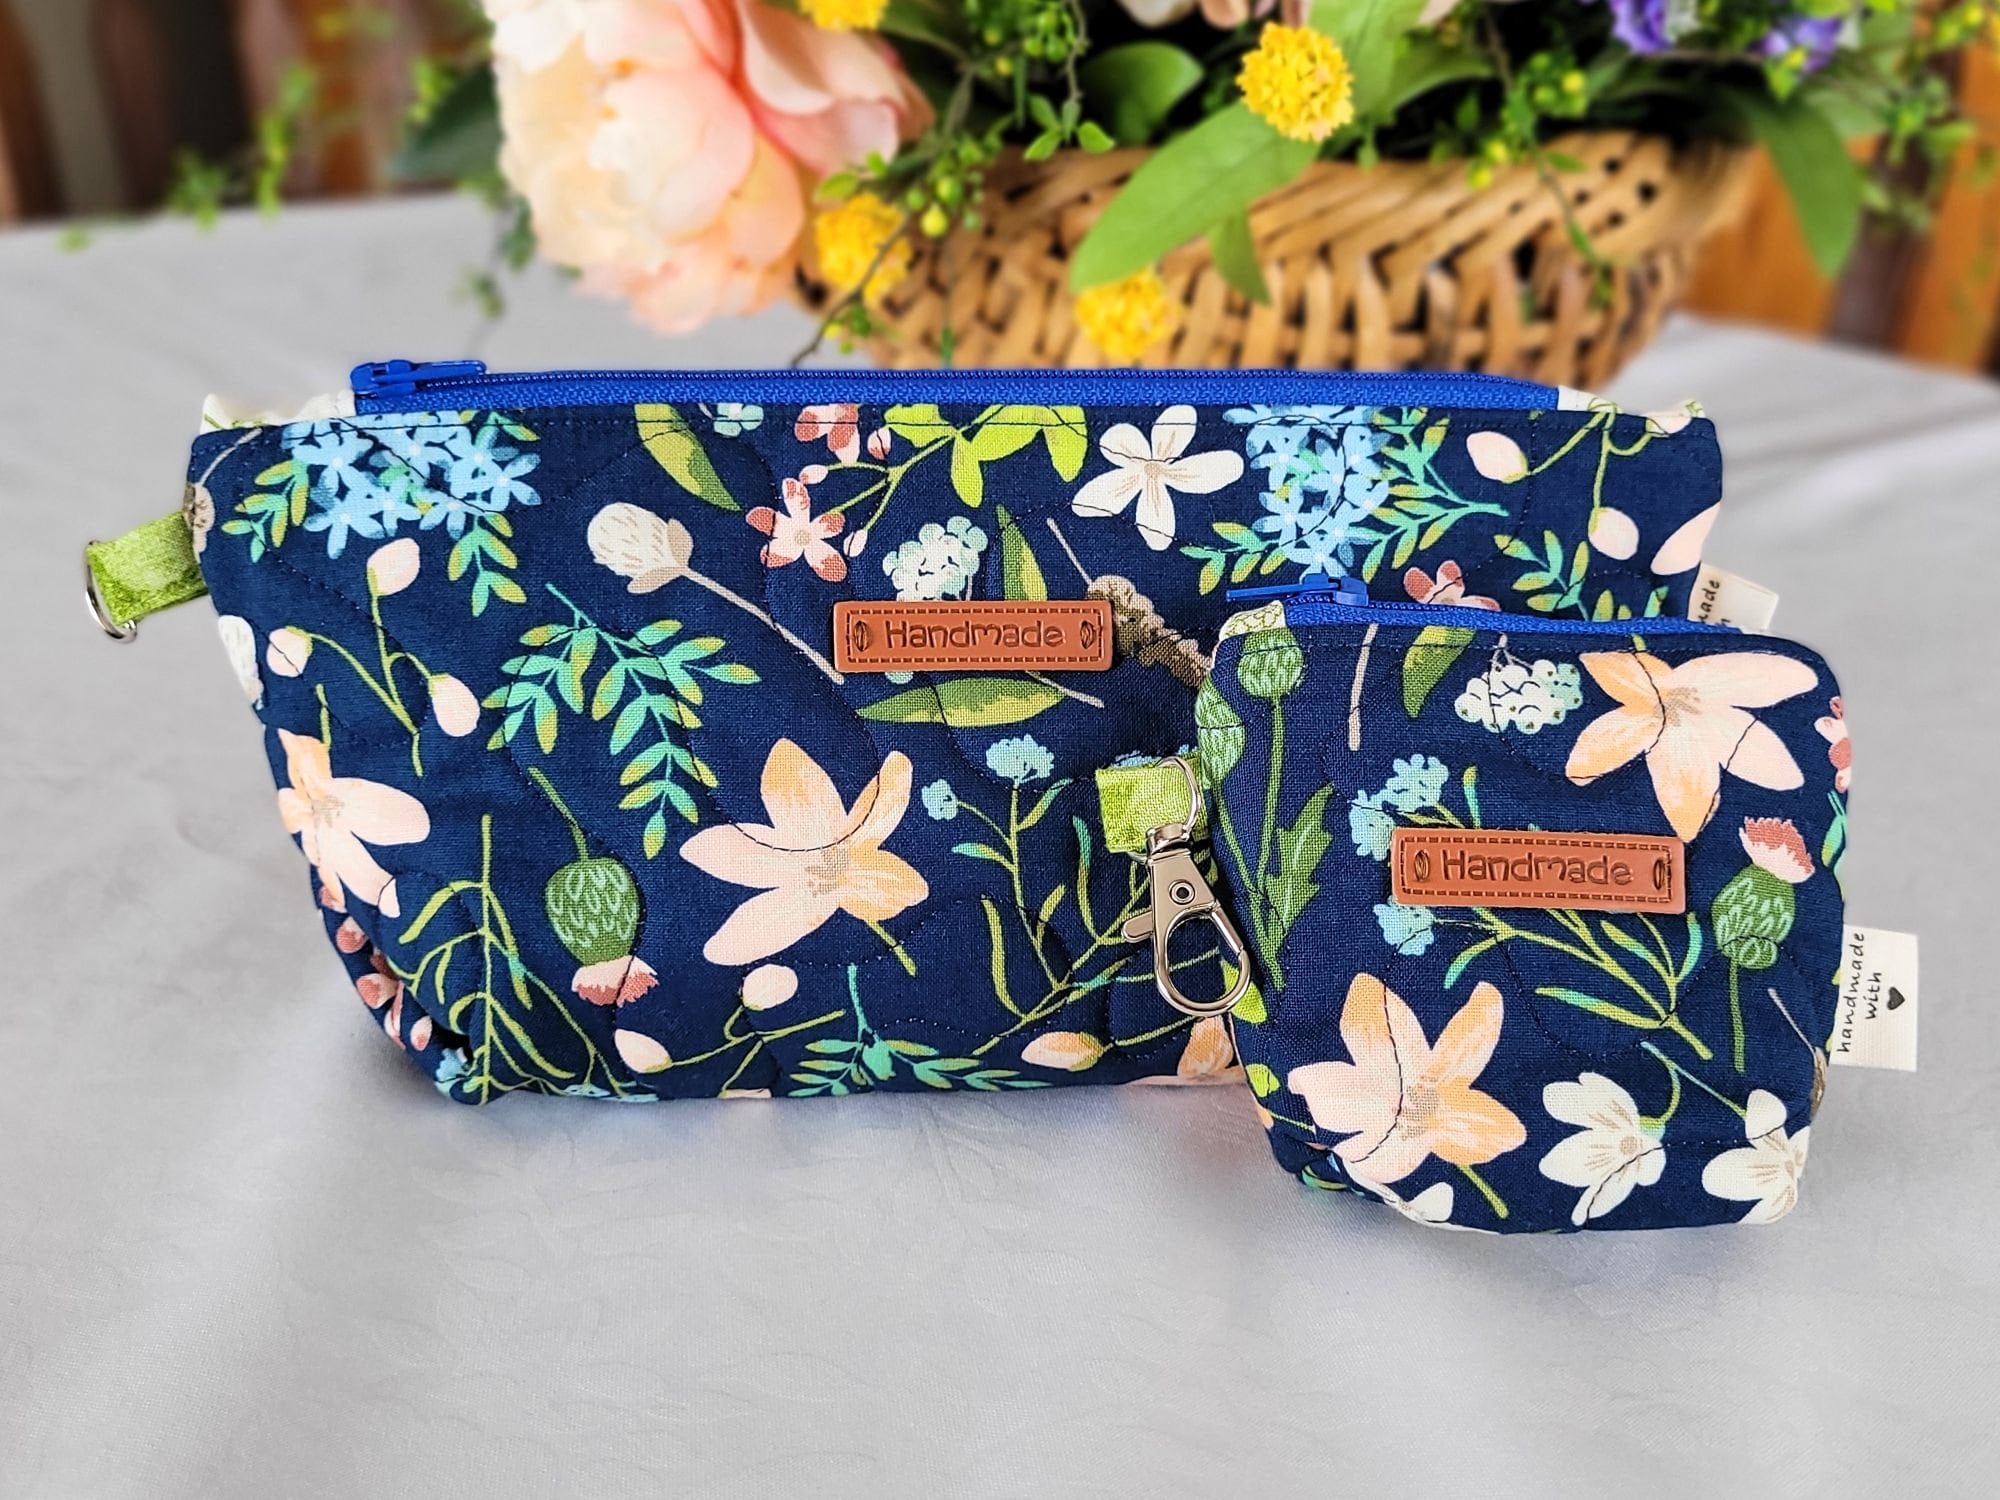 quilted zipper pouch in navy floral fabric